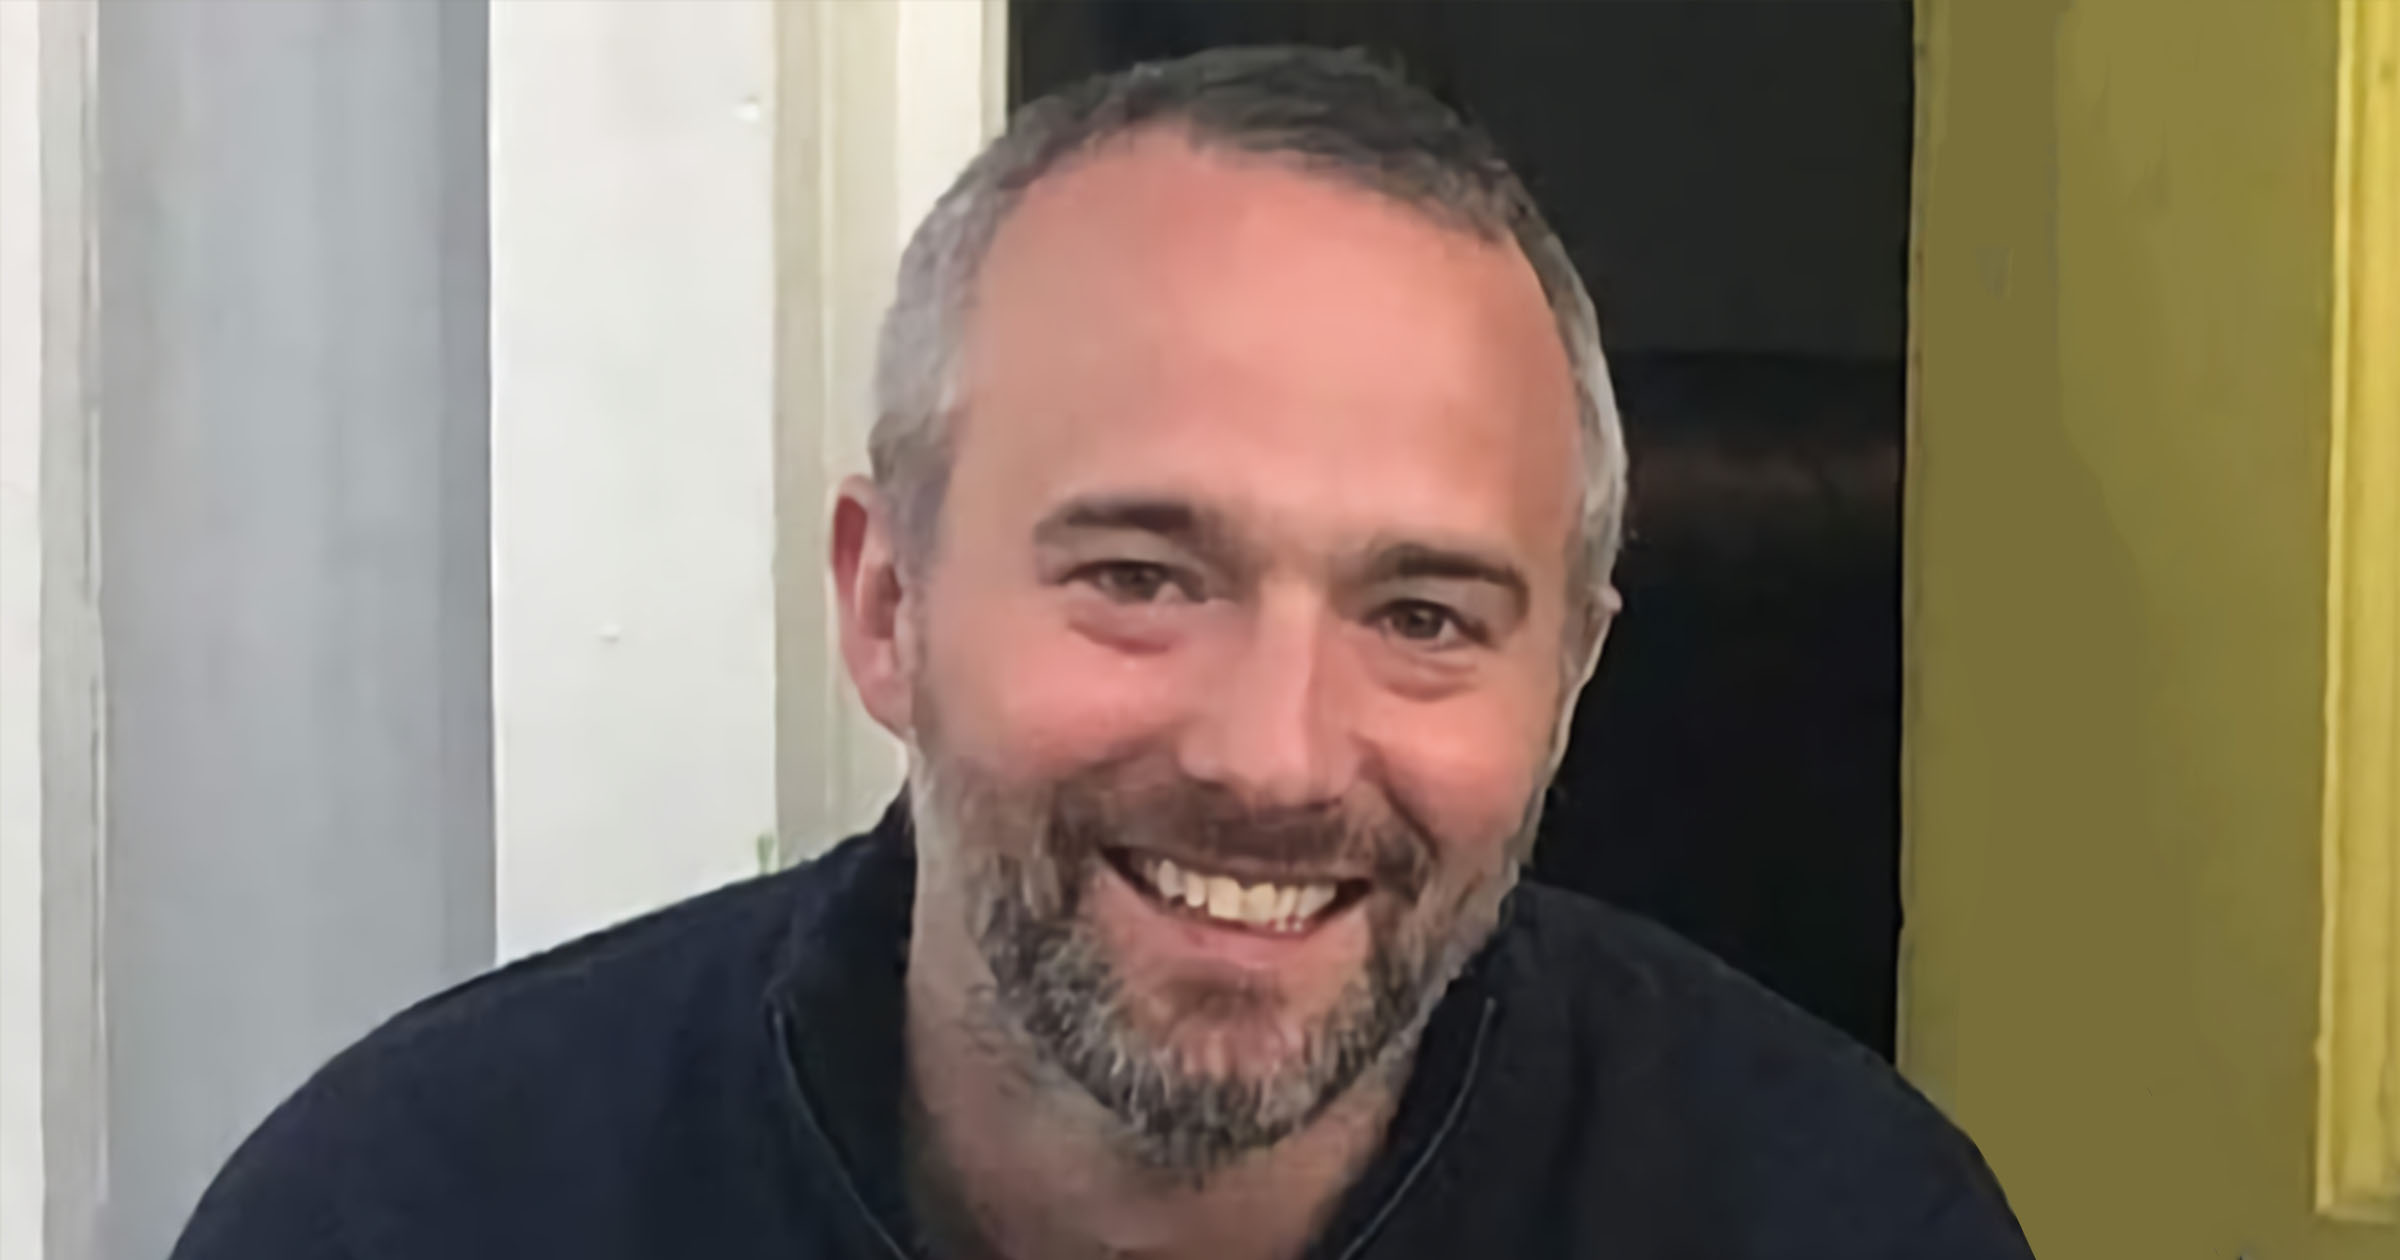 Welcome John-Mark Davidson, Director of Member Connections